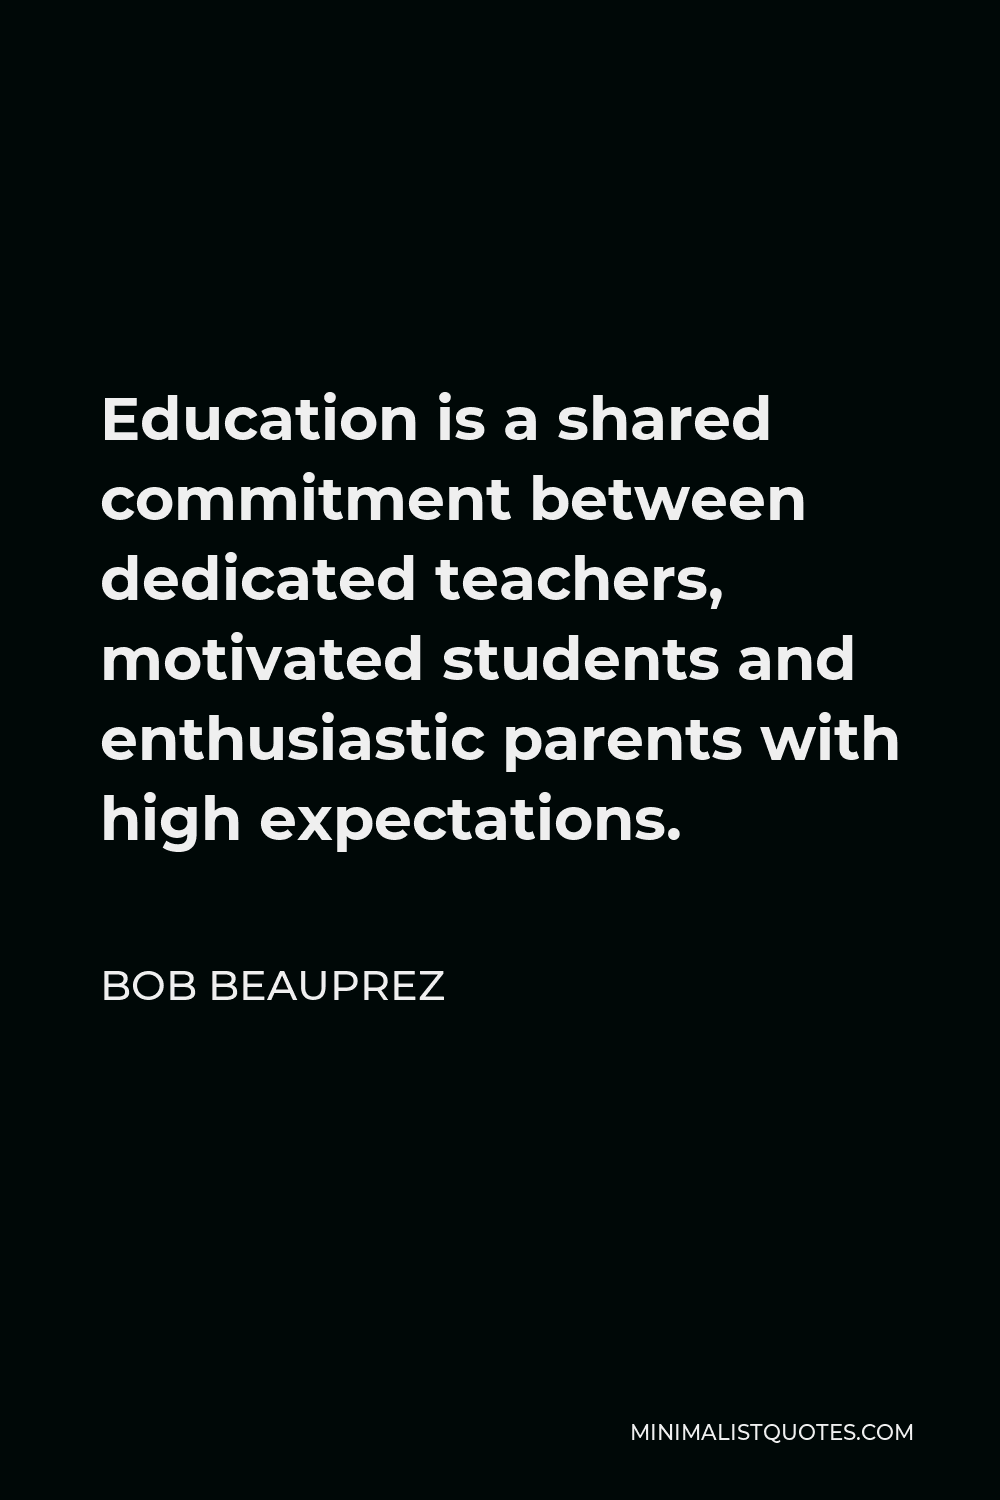 Bob Beauprez Quote - Education is a shared commitment between dedicated teachers, motivated students and enthusiastic parents with high expectations.